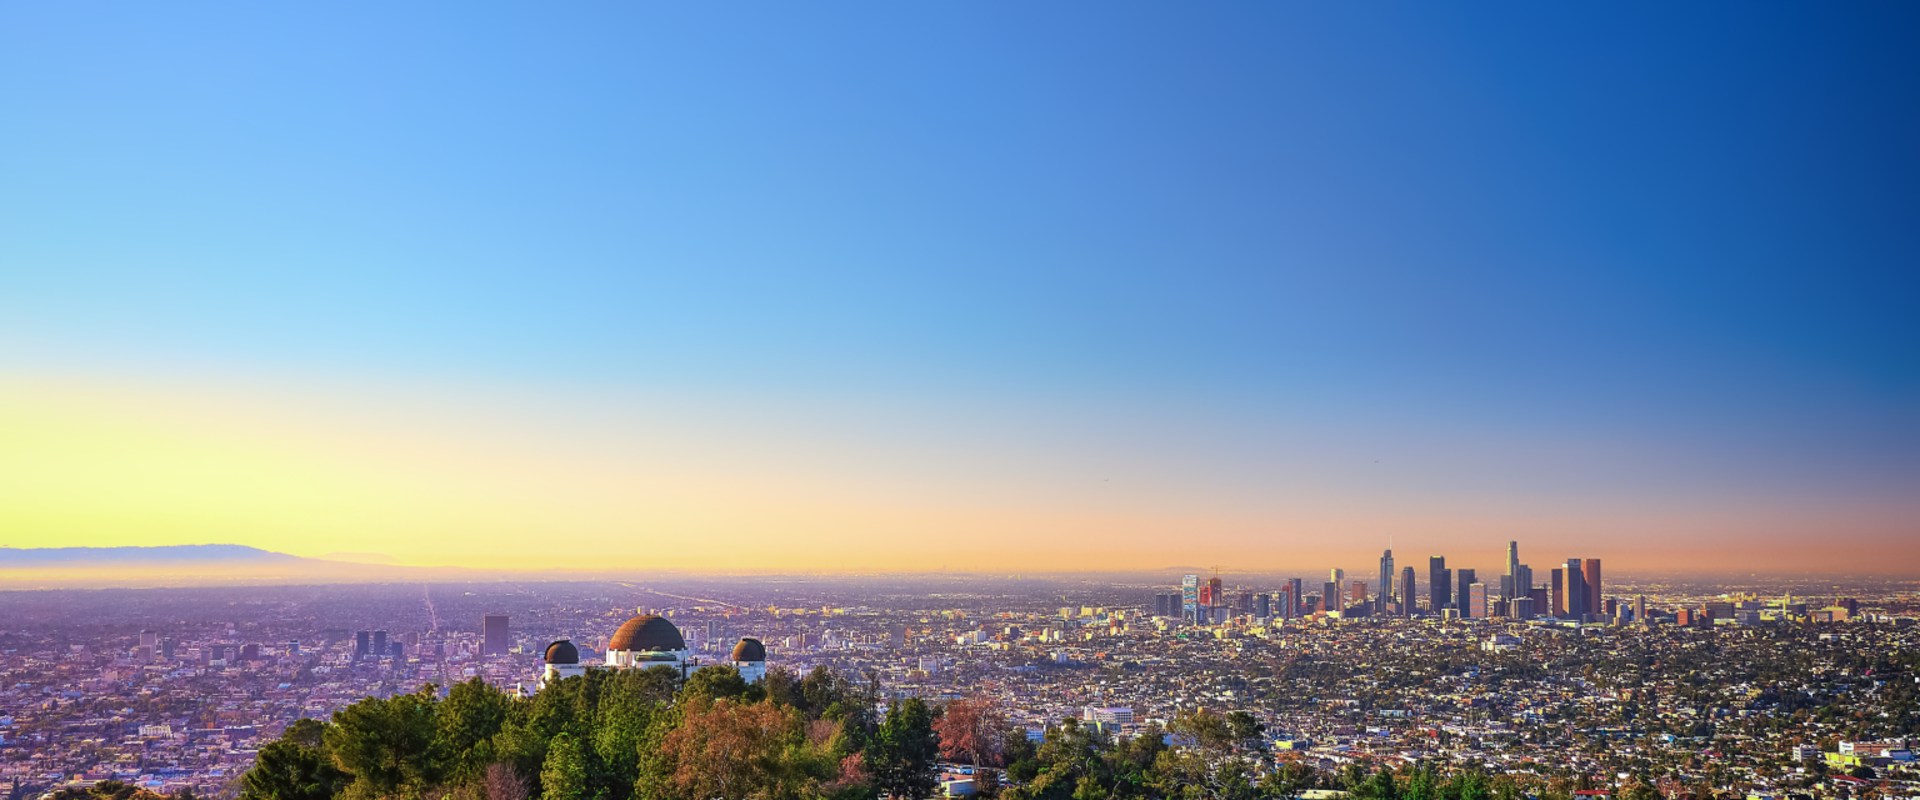 Building a Sustainable Future: Los Angeles' Green Initiatives